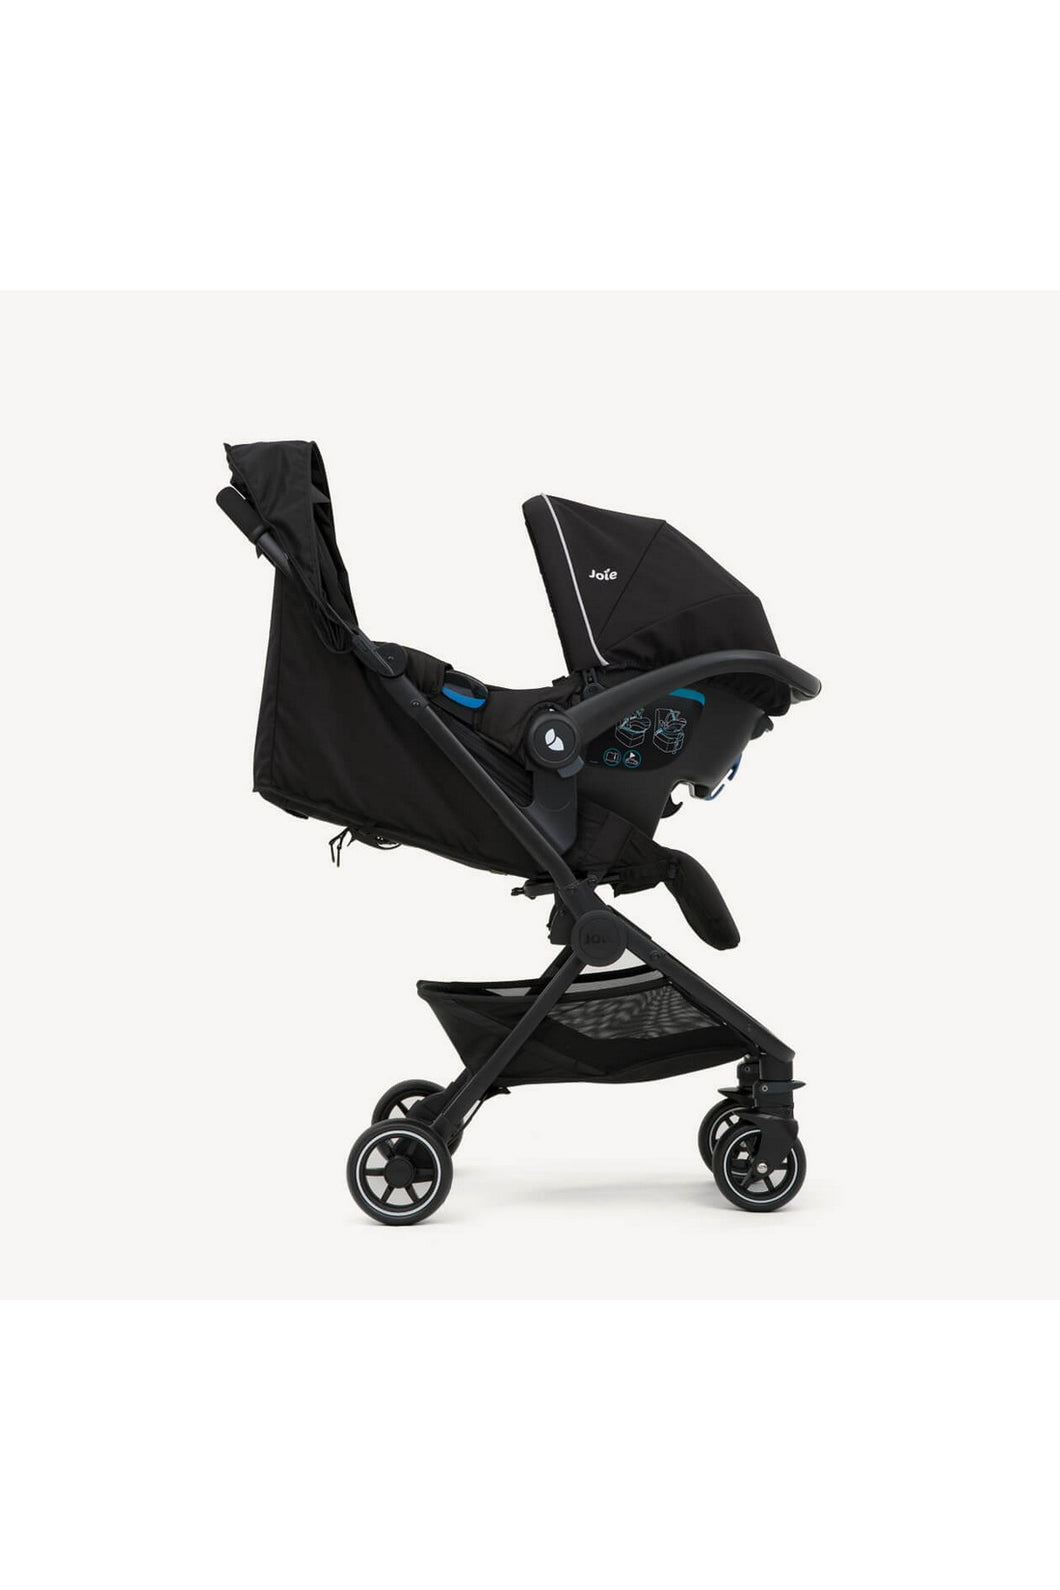 Joie Pact™ Stroller with Gemm™ infant Carseat Coal 2